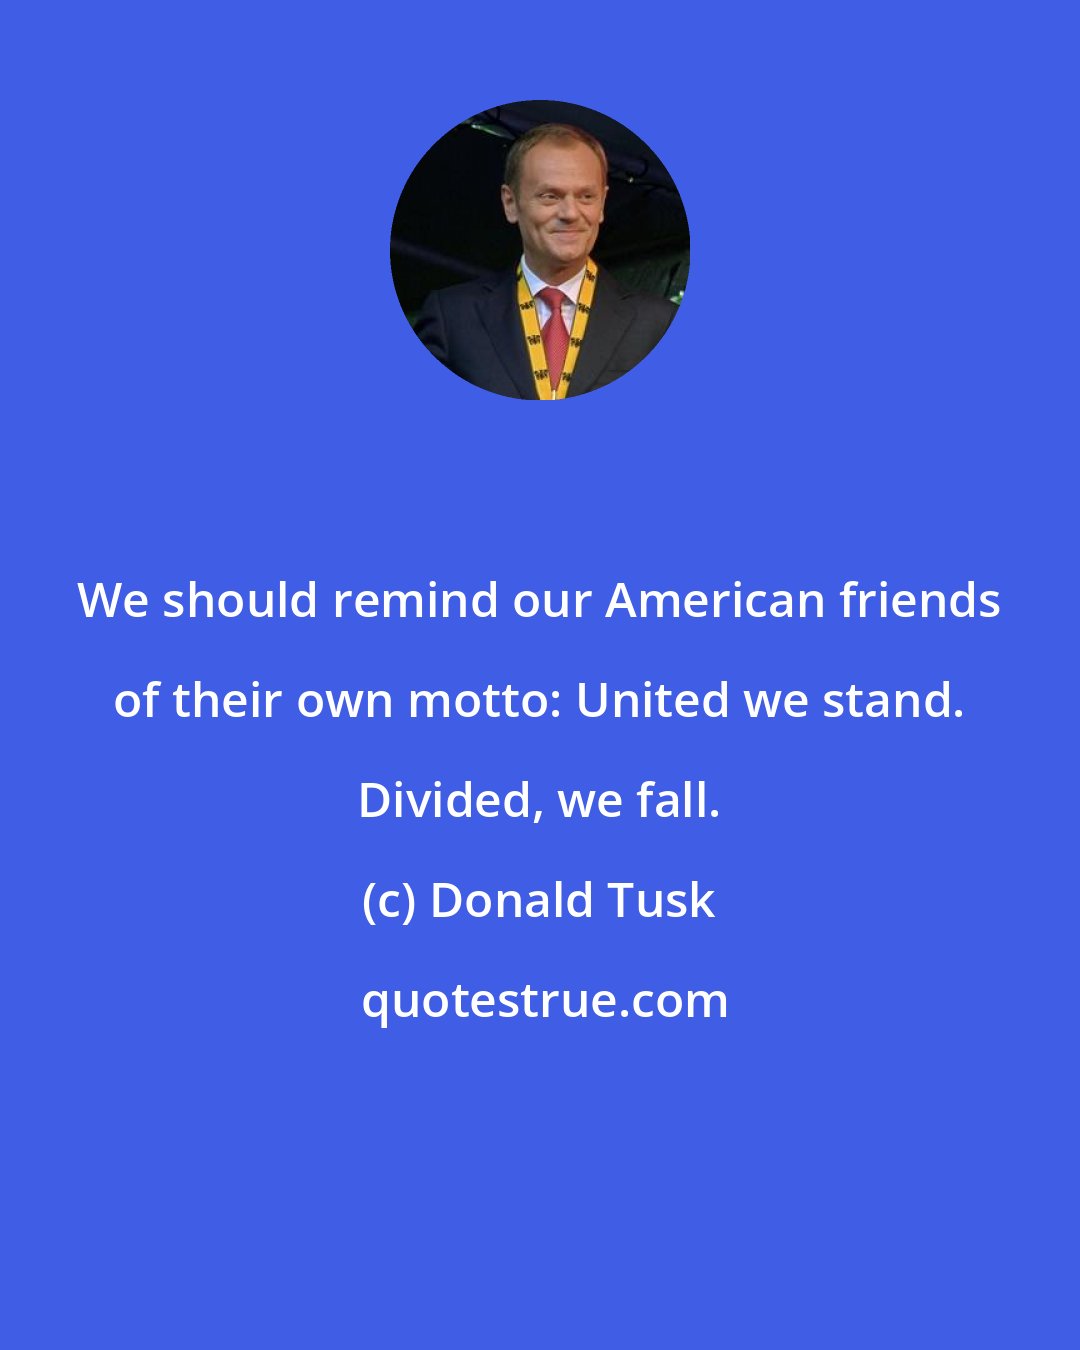 Donald Tusk: We should remind our American friends of their own motto: United we stand. Divided, we fall.